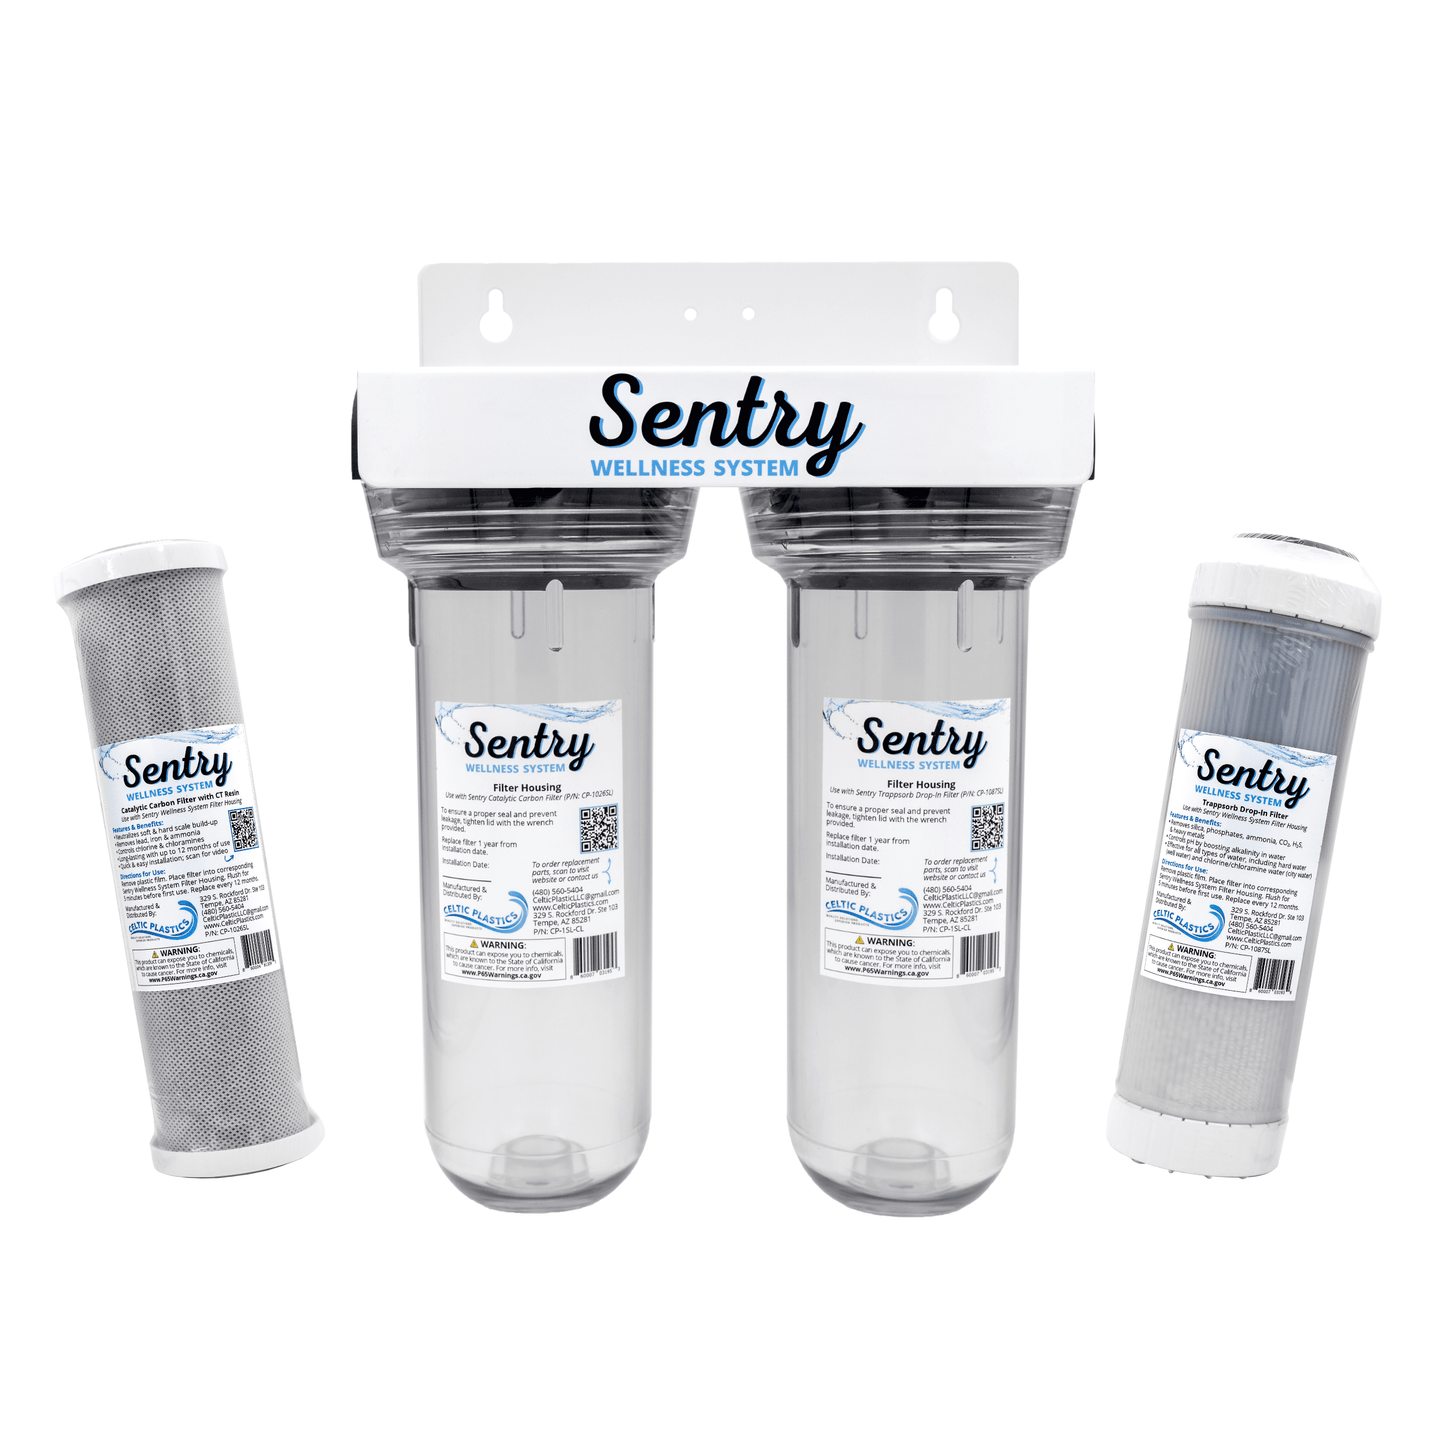 Sentry Wellness System - Housing & Filters